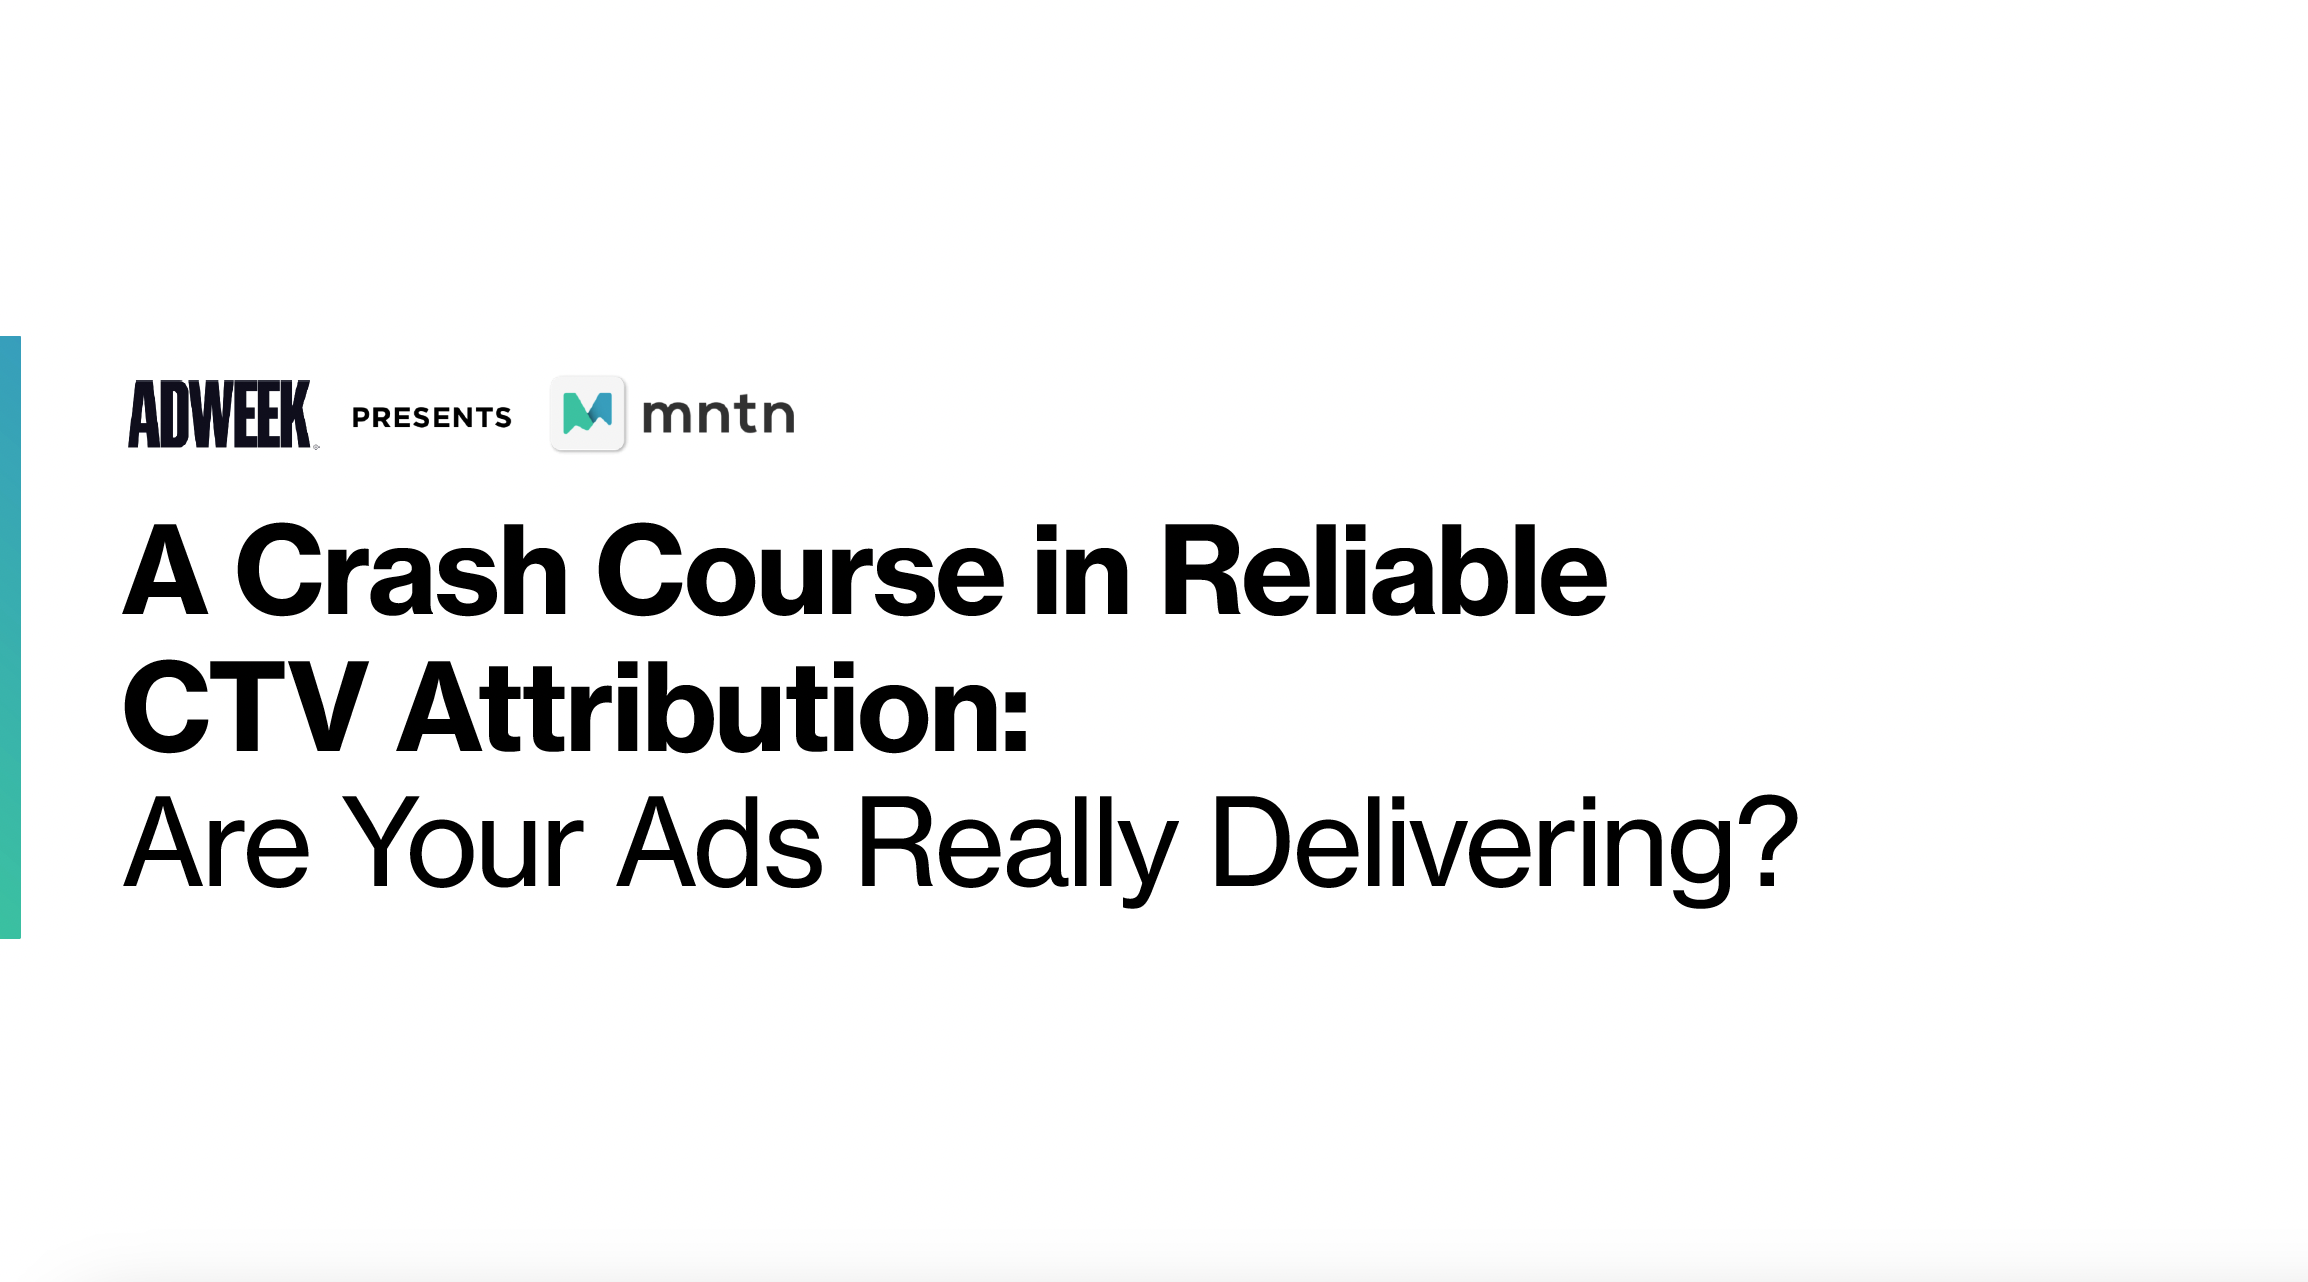 A Crash Course in Reliable CTV Attribution: Are Your Ads Really Delivering?